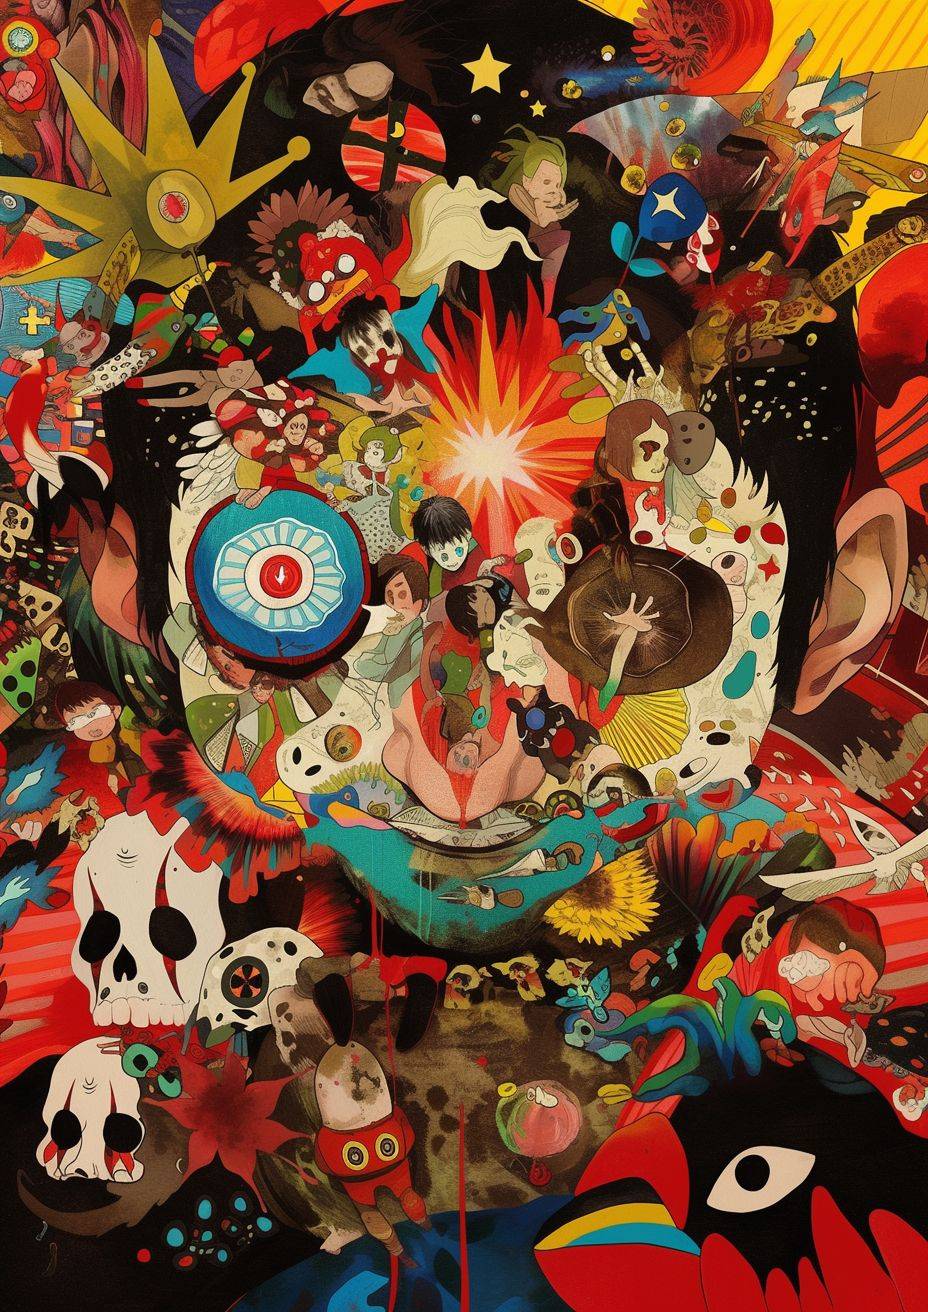 An anime painting featuring a huge head with Studio Ghibli characters, in the style of Grégoire Guillemin, Junji Ito, Hieronymus Bosch—playful yet macabre, a mixed media marvel with colorful biomorphic forms, comic art, Mcdonaldpunk, primary colors, and realistic detail --ar 89:125 --niji 6 --style raw.